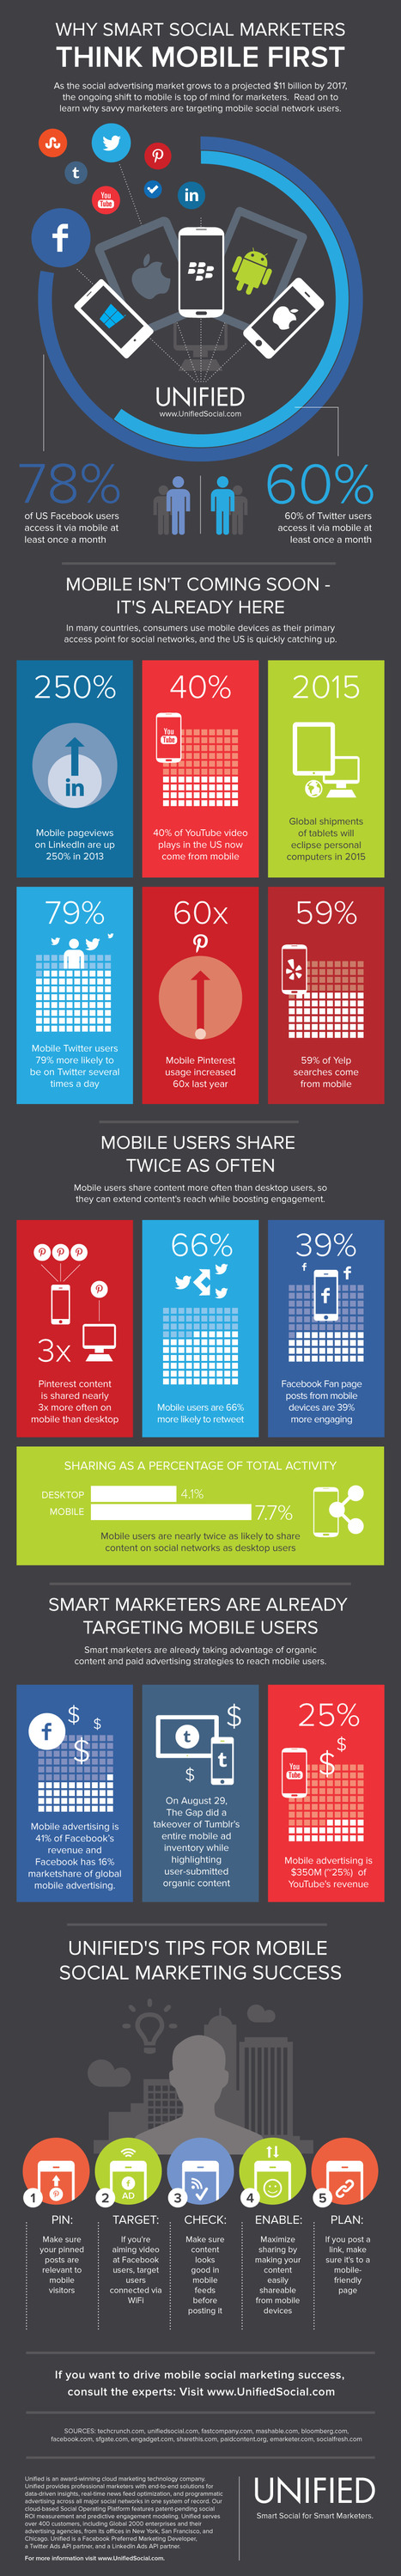 Why Smart Social Marketers Think Mobile First | Low Power Heads Up Display | Scoop.it